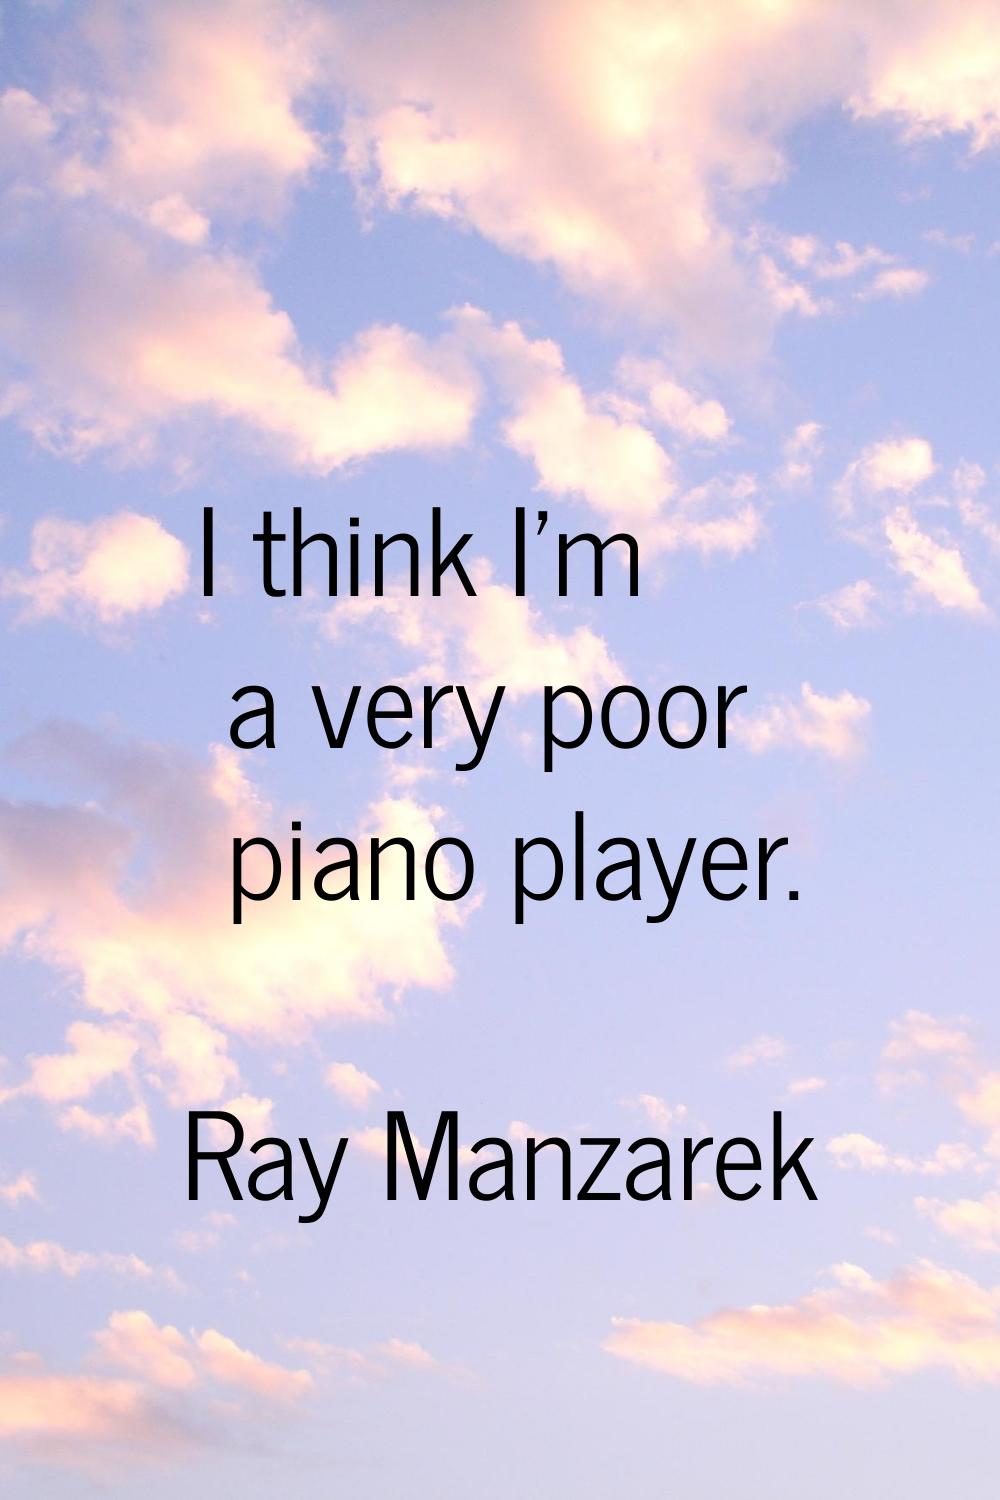 I think I'm a very poor piano player.